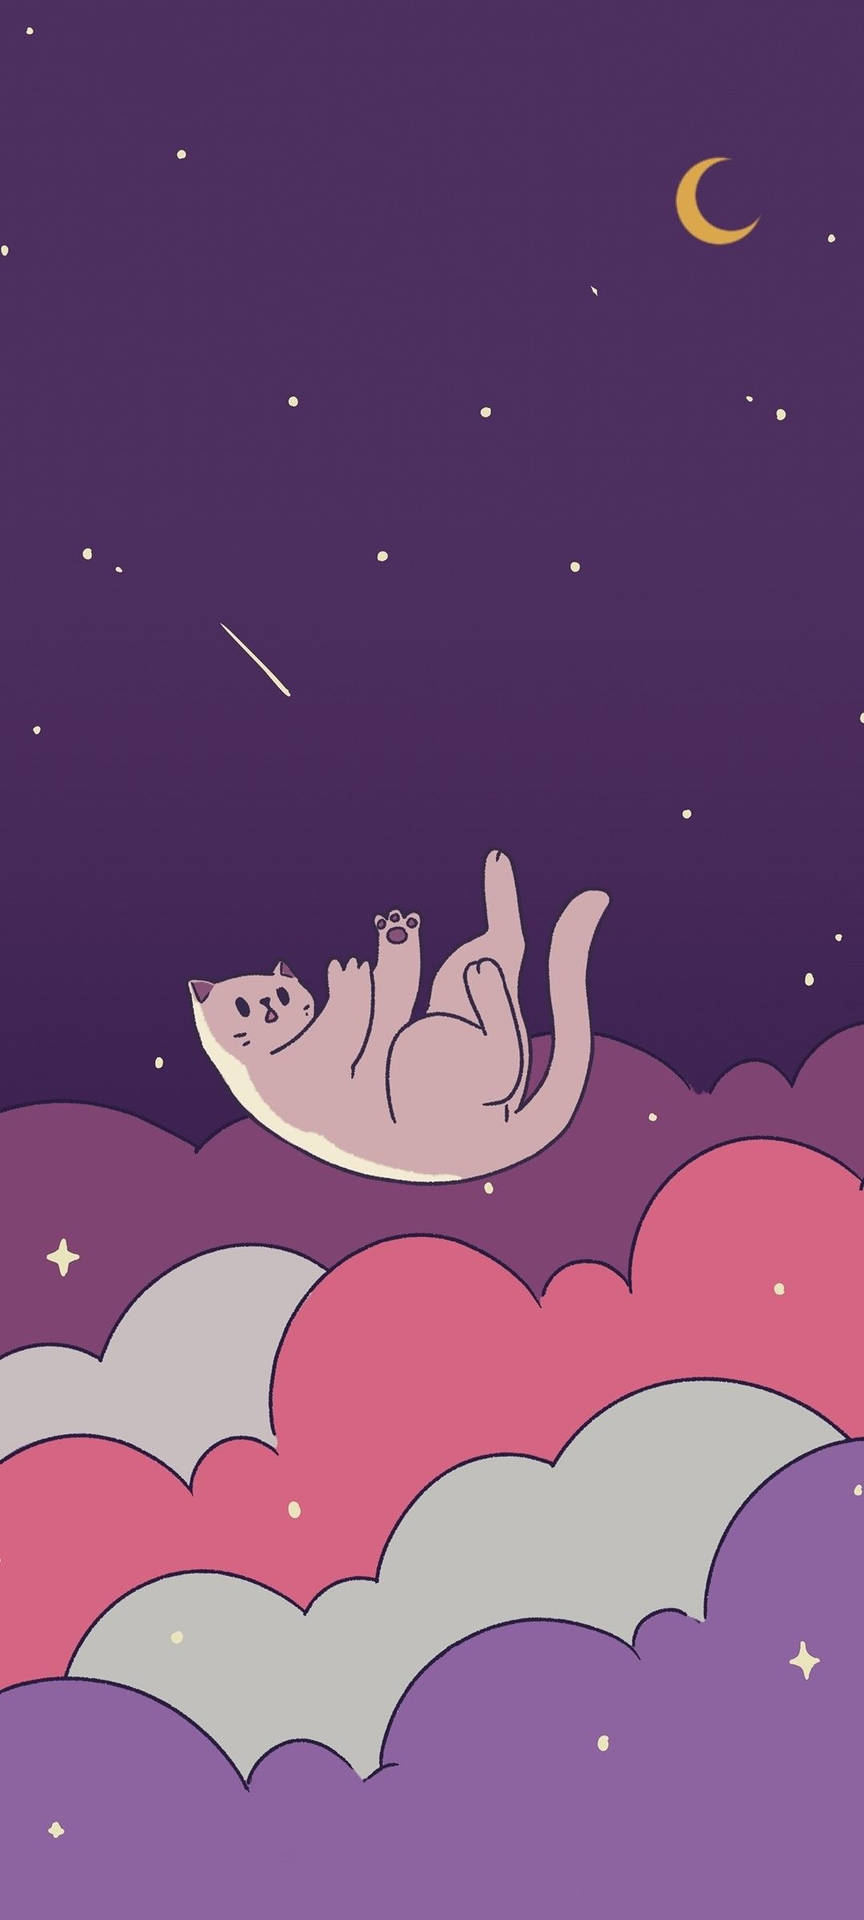 Download A Cat Is Flying In The Clouds Wallpaper | Wallpapers.com